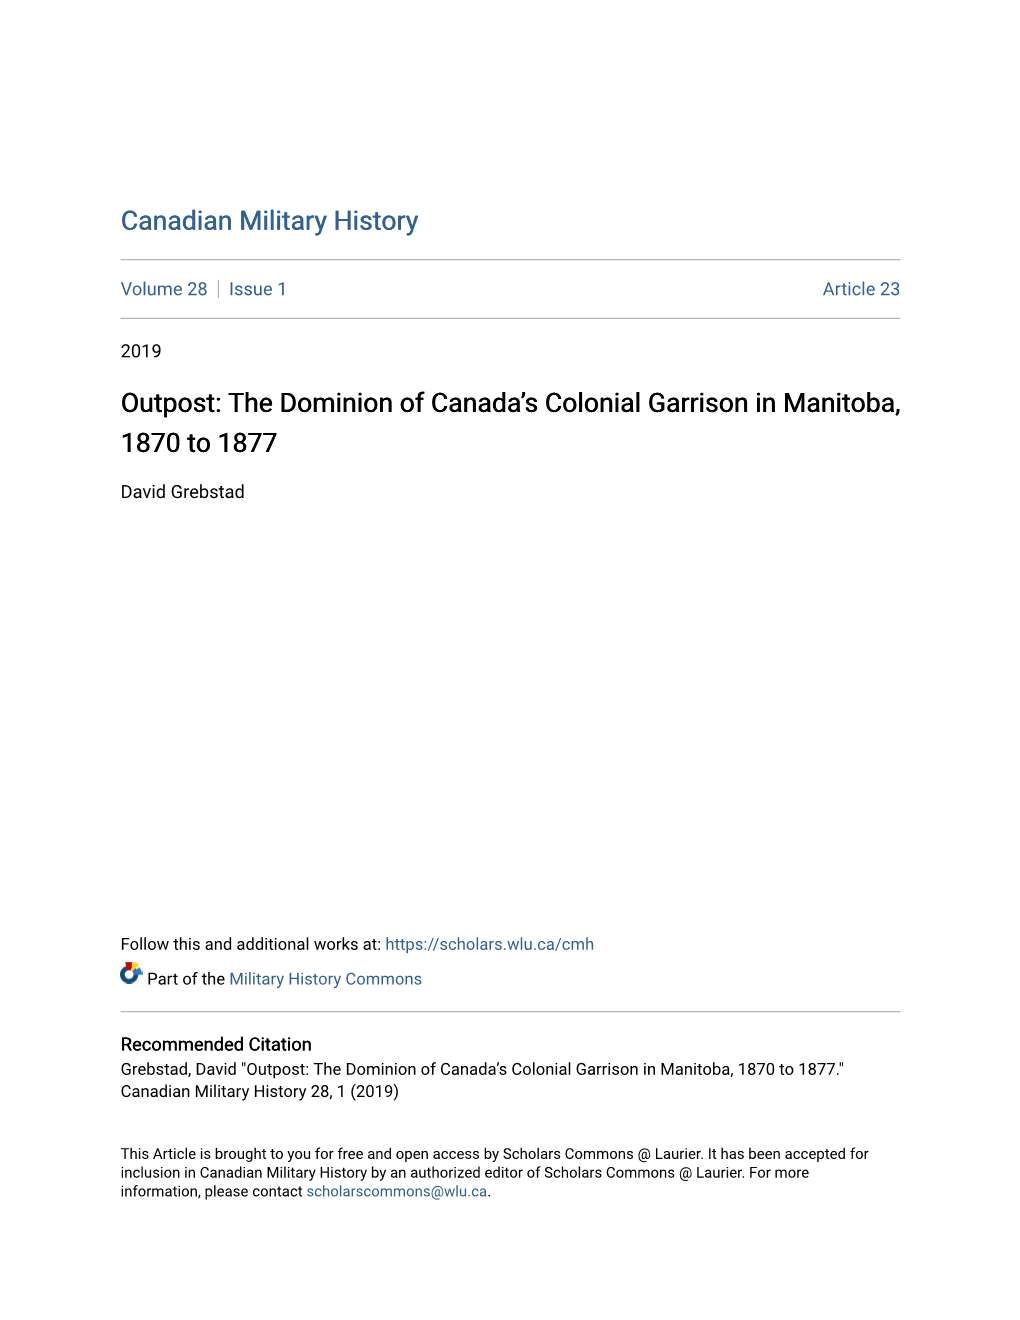 The Dominion of Canada's Colonial Garrison in Manitoba, 1870 to 1877